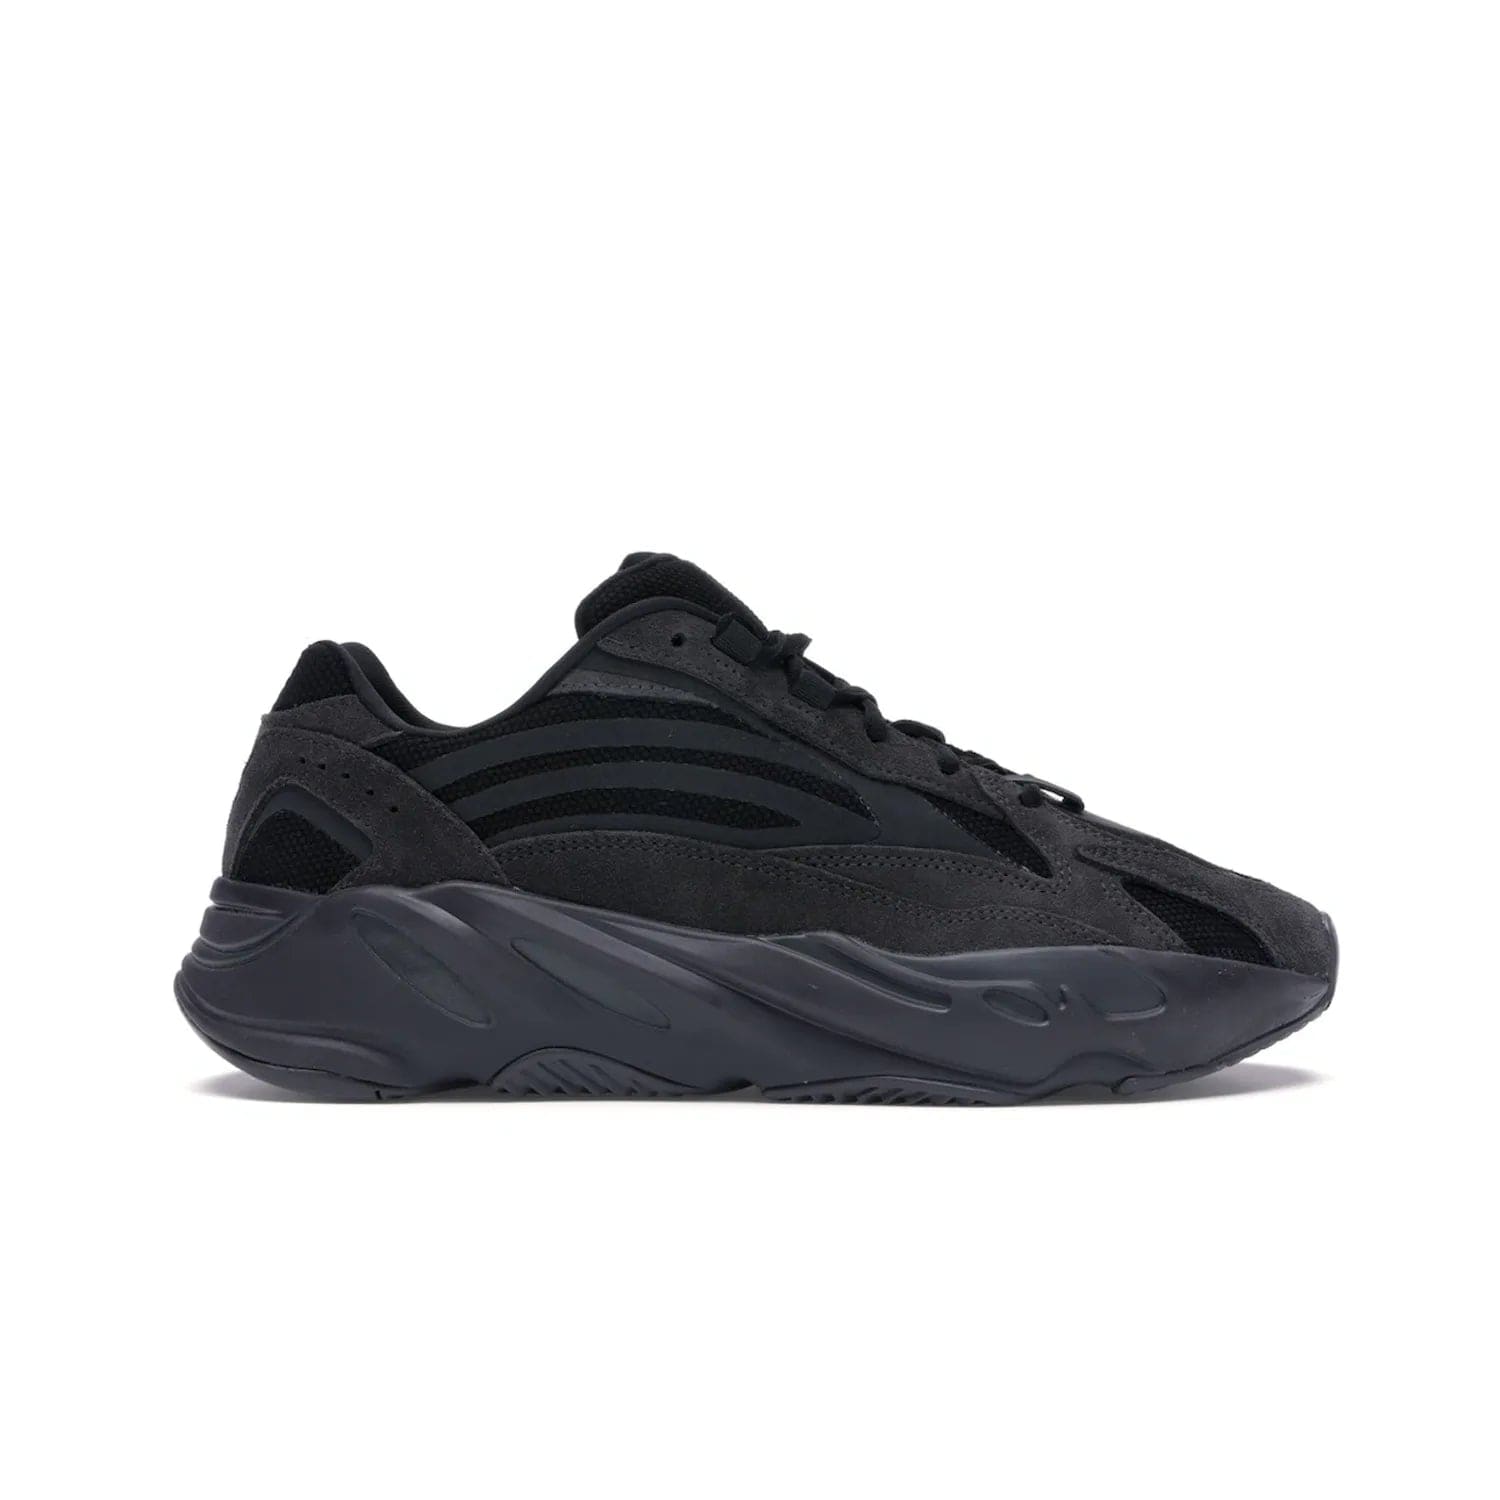 adidas Yeezy Boost 700 V2 Vanta - Image 1 - Only at www.BallersClubKickz.com - Introducing the adidas Yeezy Boost 700 V2 Vanta - a sleek and stylish all-black design featuring a combination of mesh, leather, and suede construction with signature Boost cushioning in the sole. The ultimate in comfort and support.